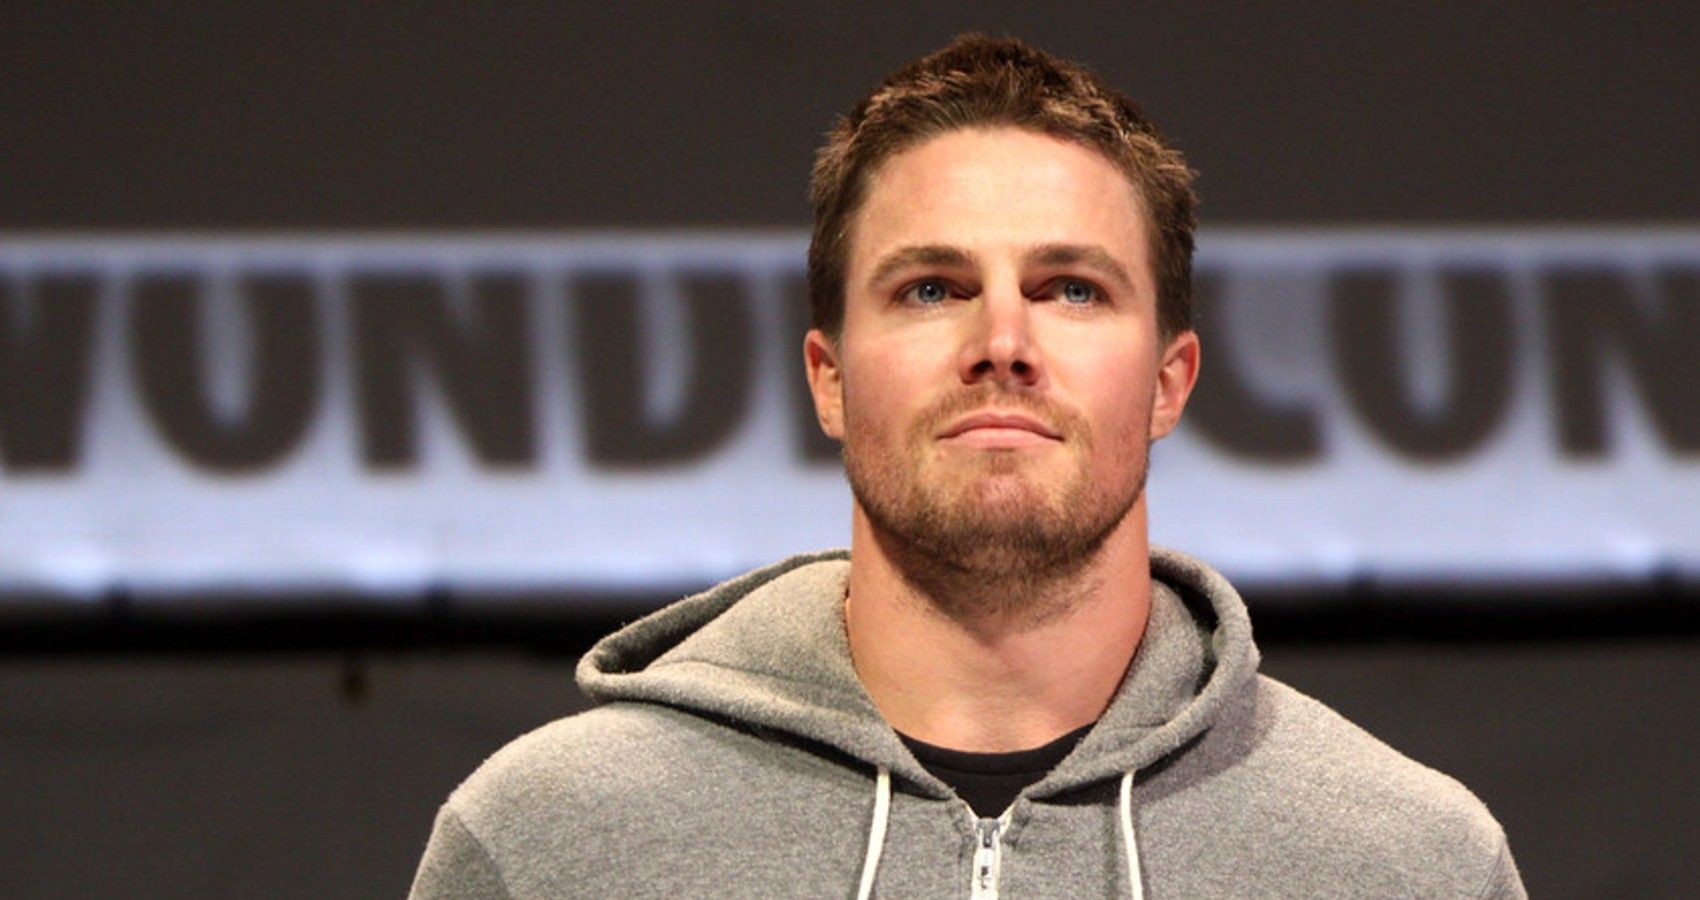 Arrow's Stephen Amell Welcomes Second Child With Wife Cassandra Jean